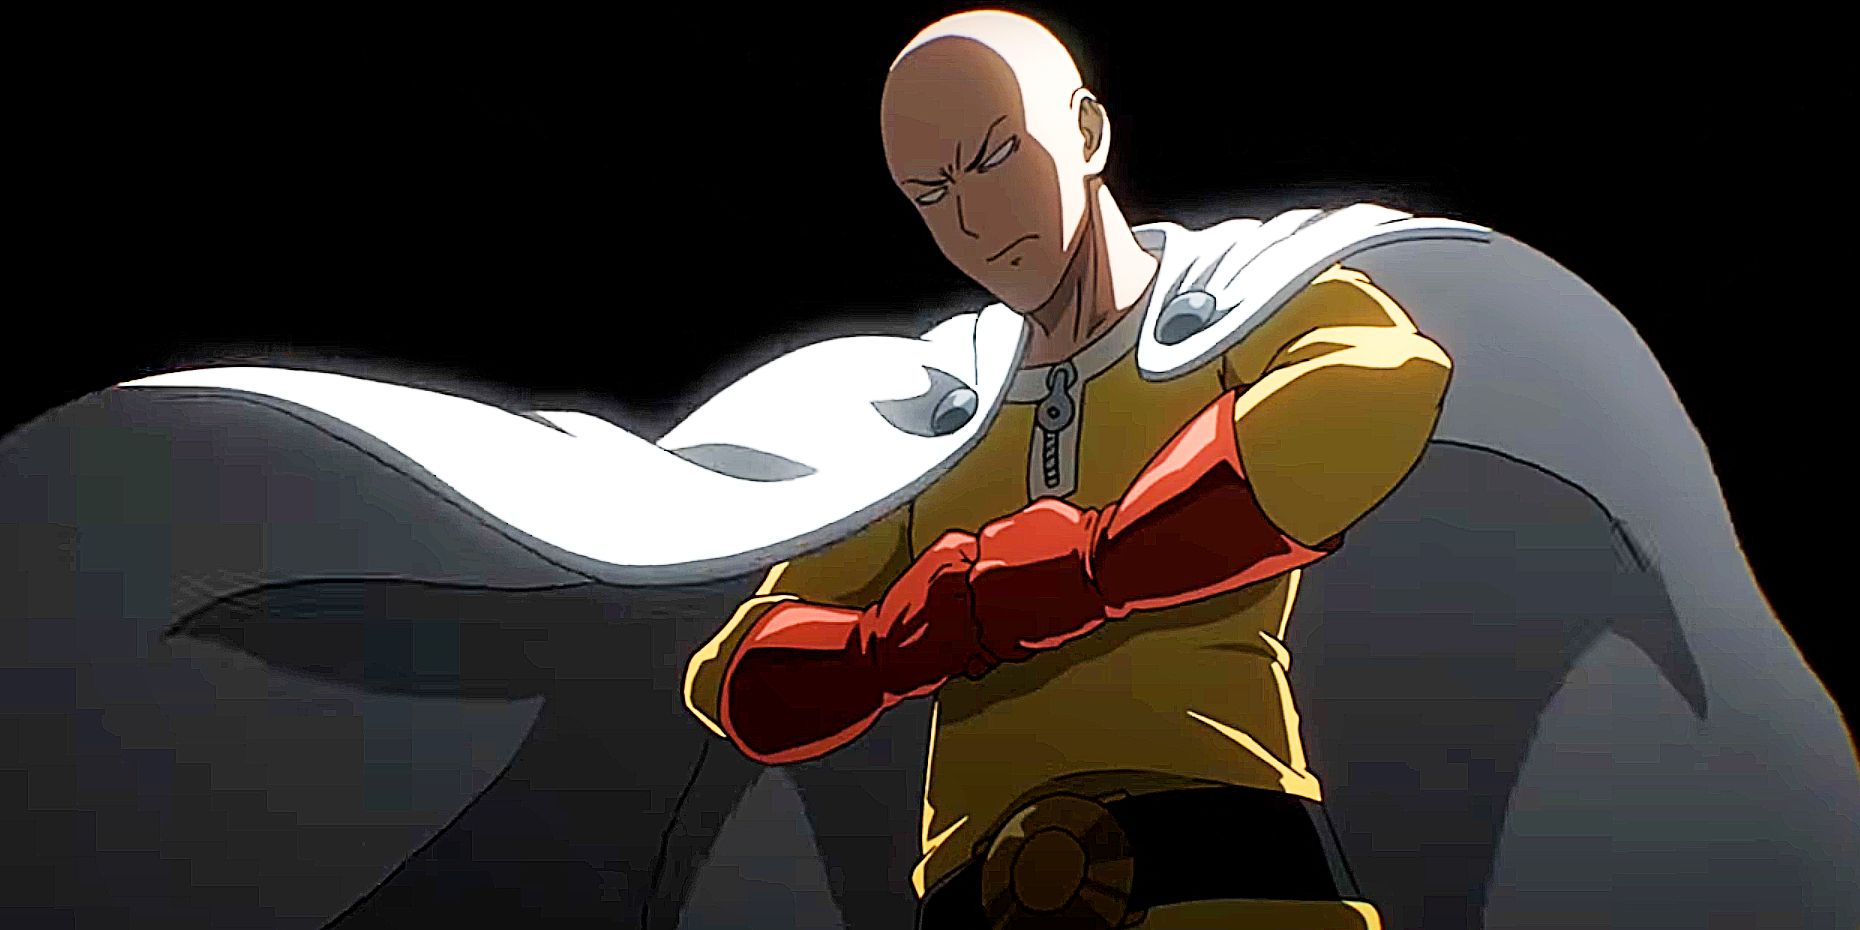 One-Punch Man prepares to fight with his fists together and a serious expression.